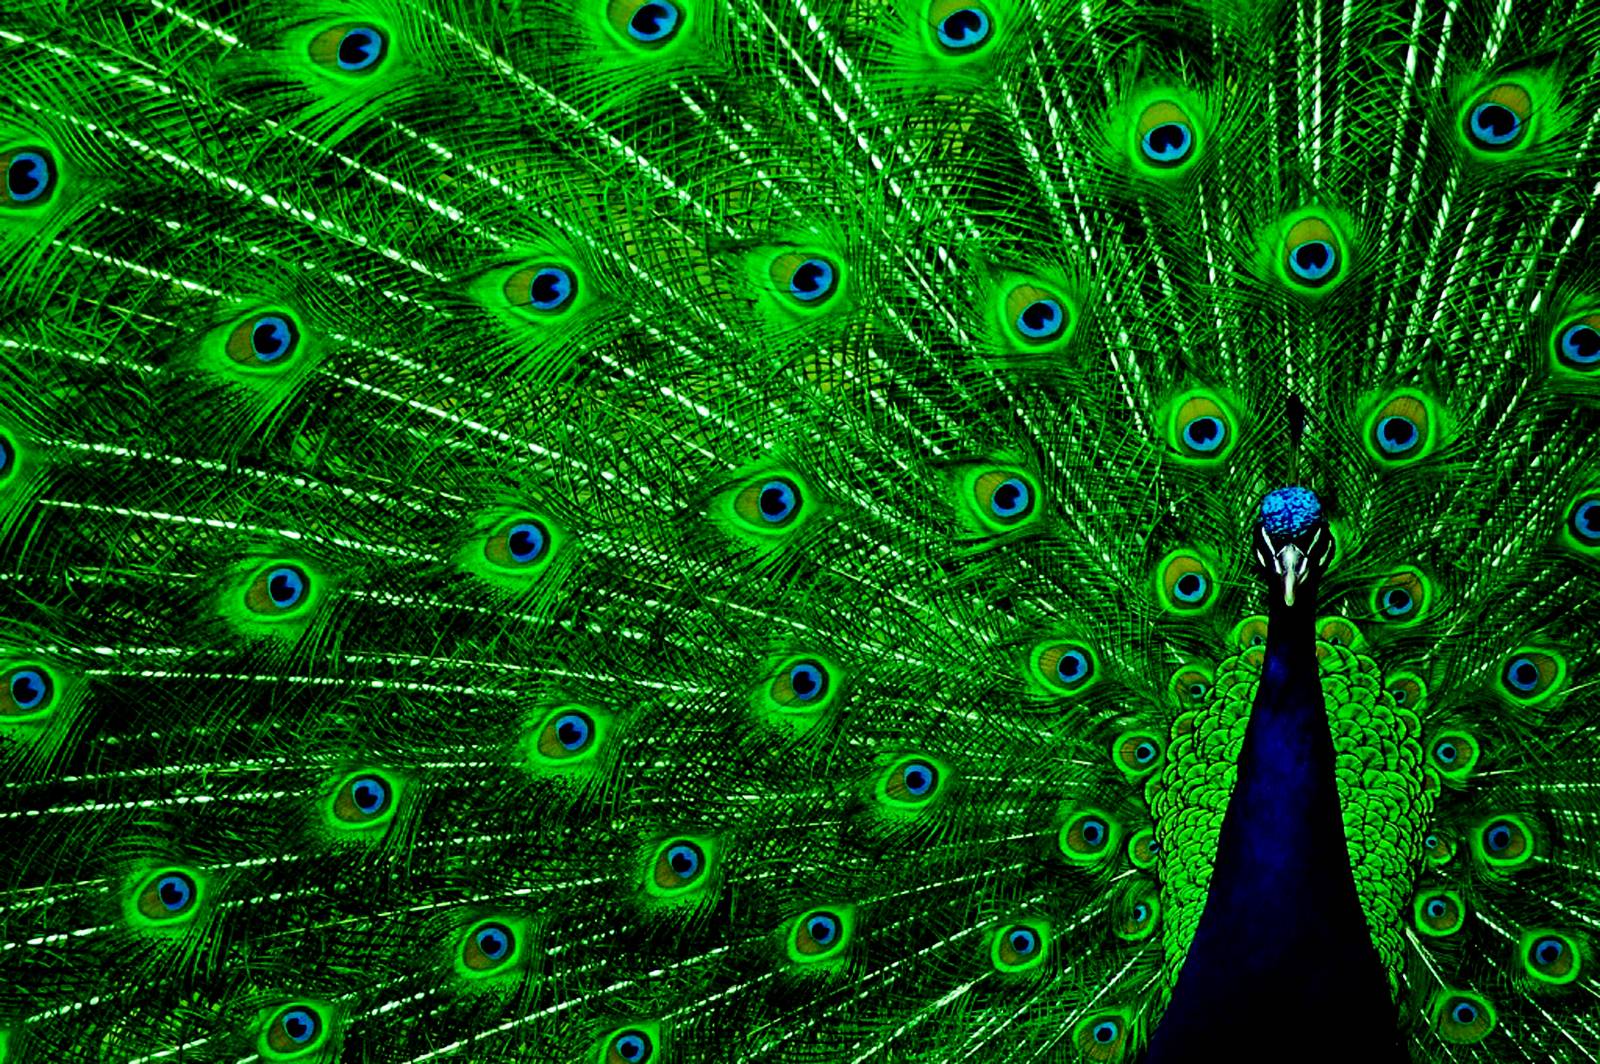 Wallpaper Of Peacock Feathers HD